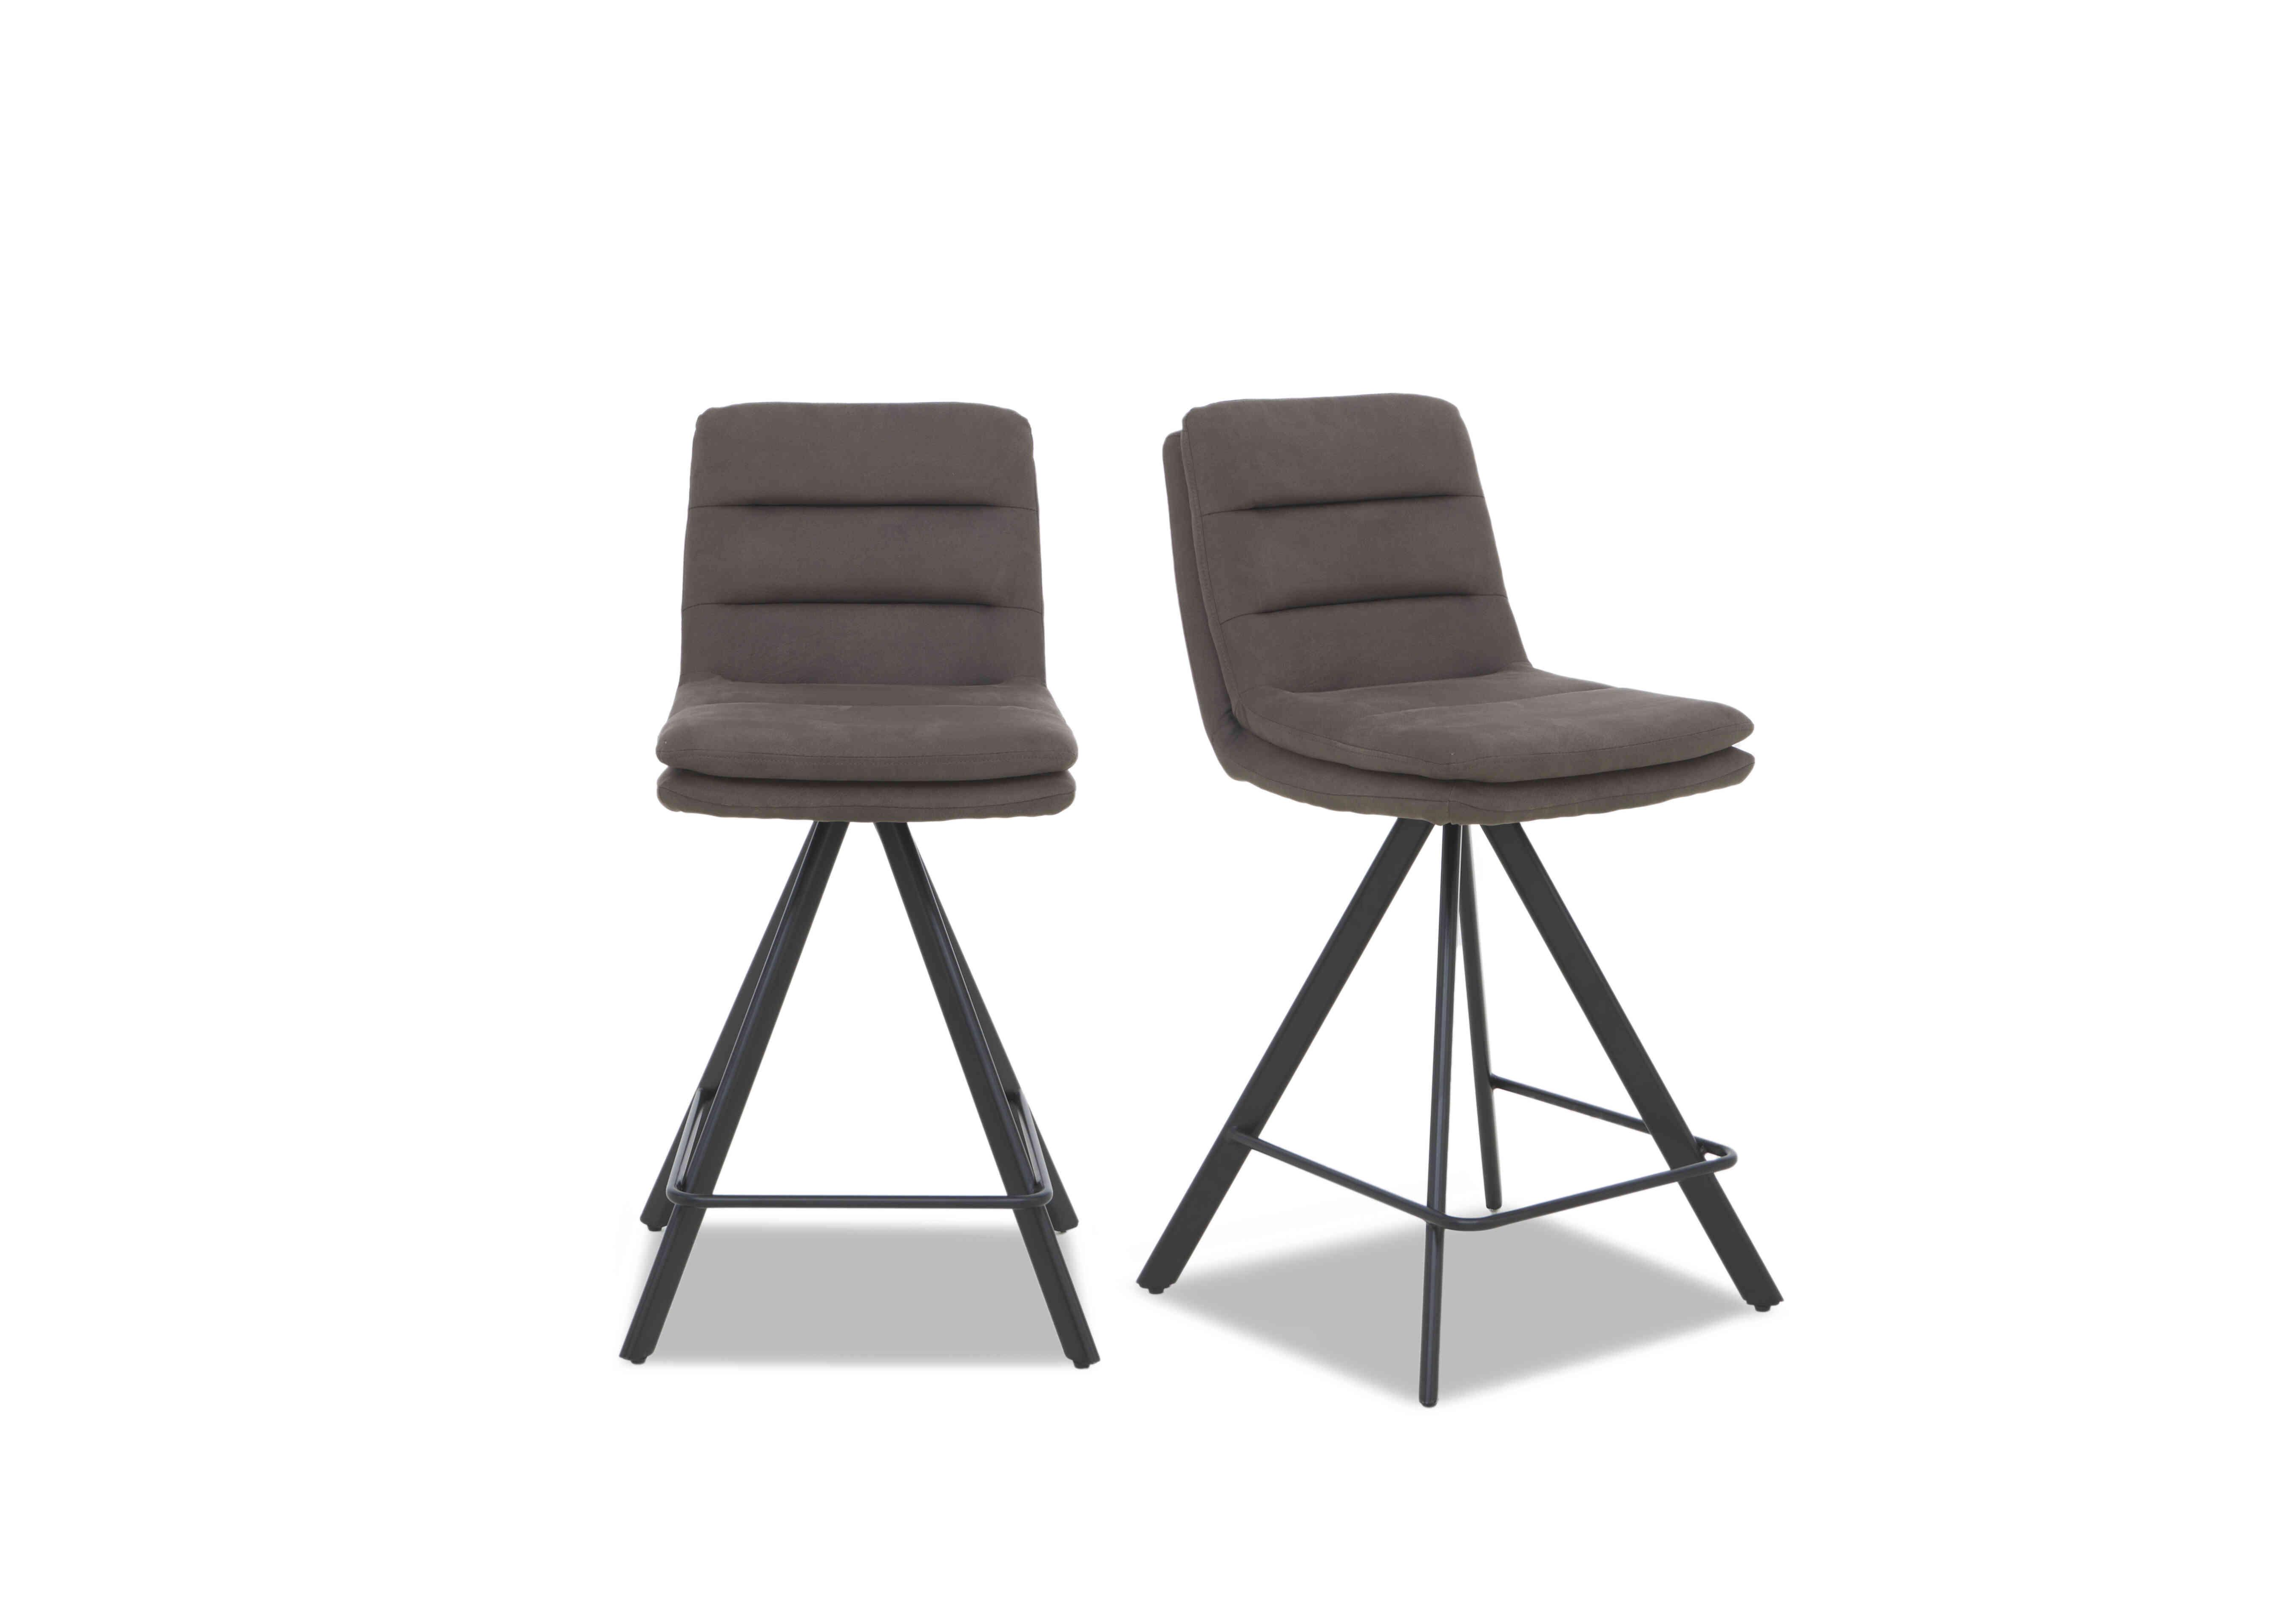 Njord Pair of Bar Stools in Anthracite on Furniture Village